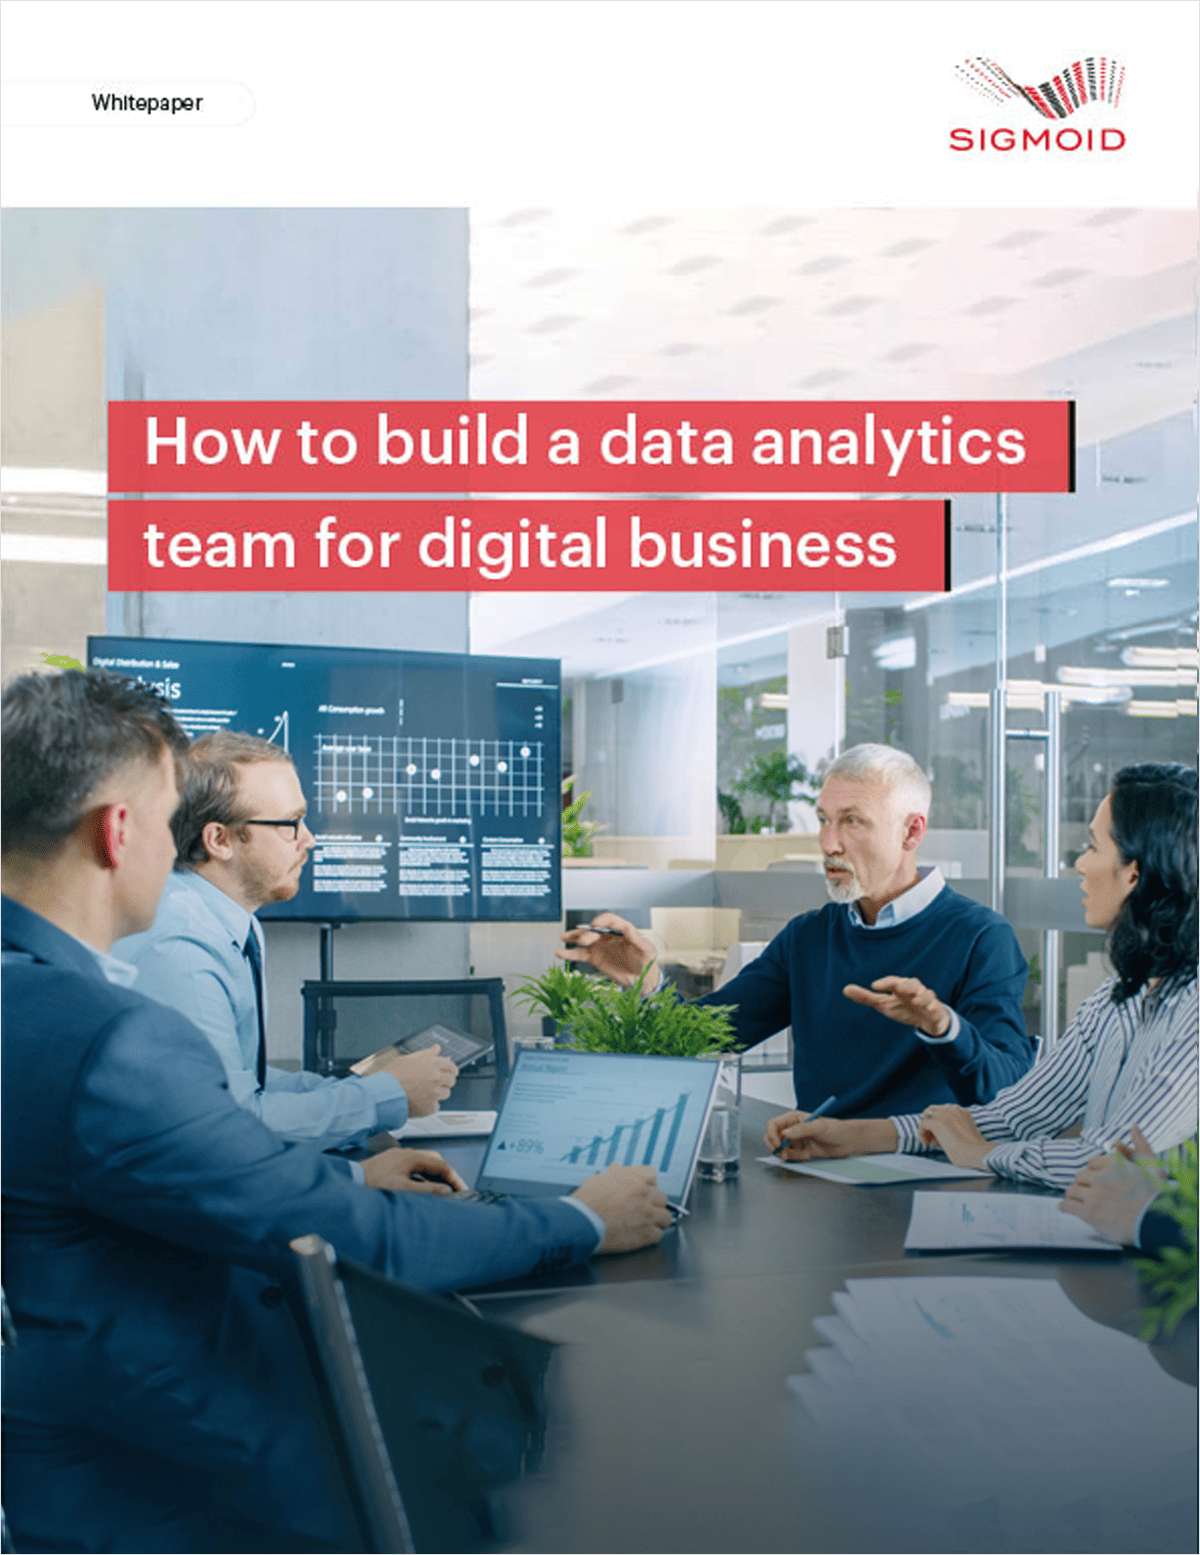 How to build a data analytics team for digital business